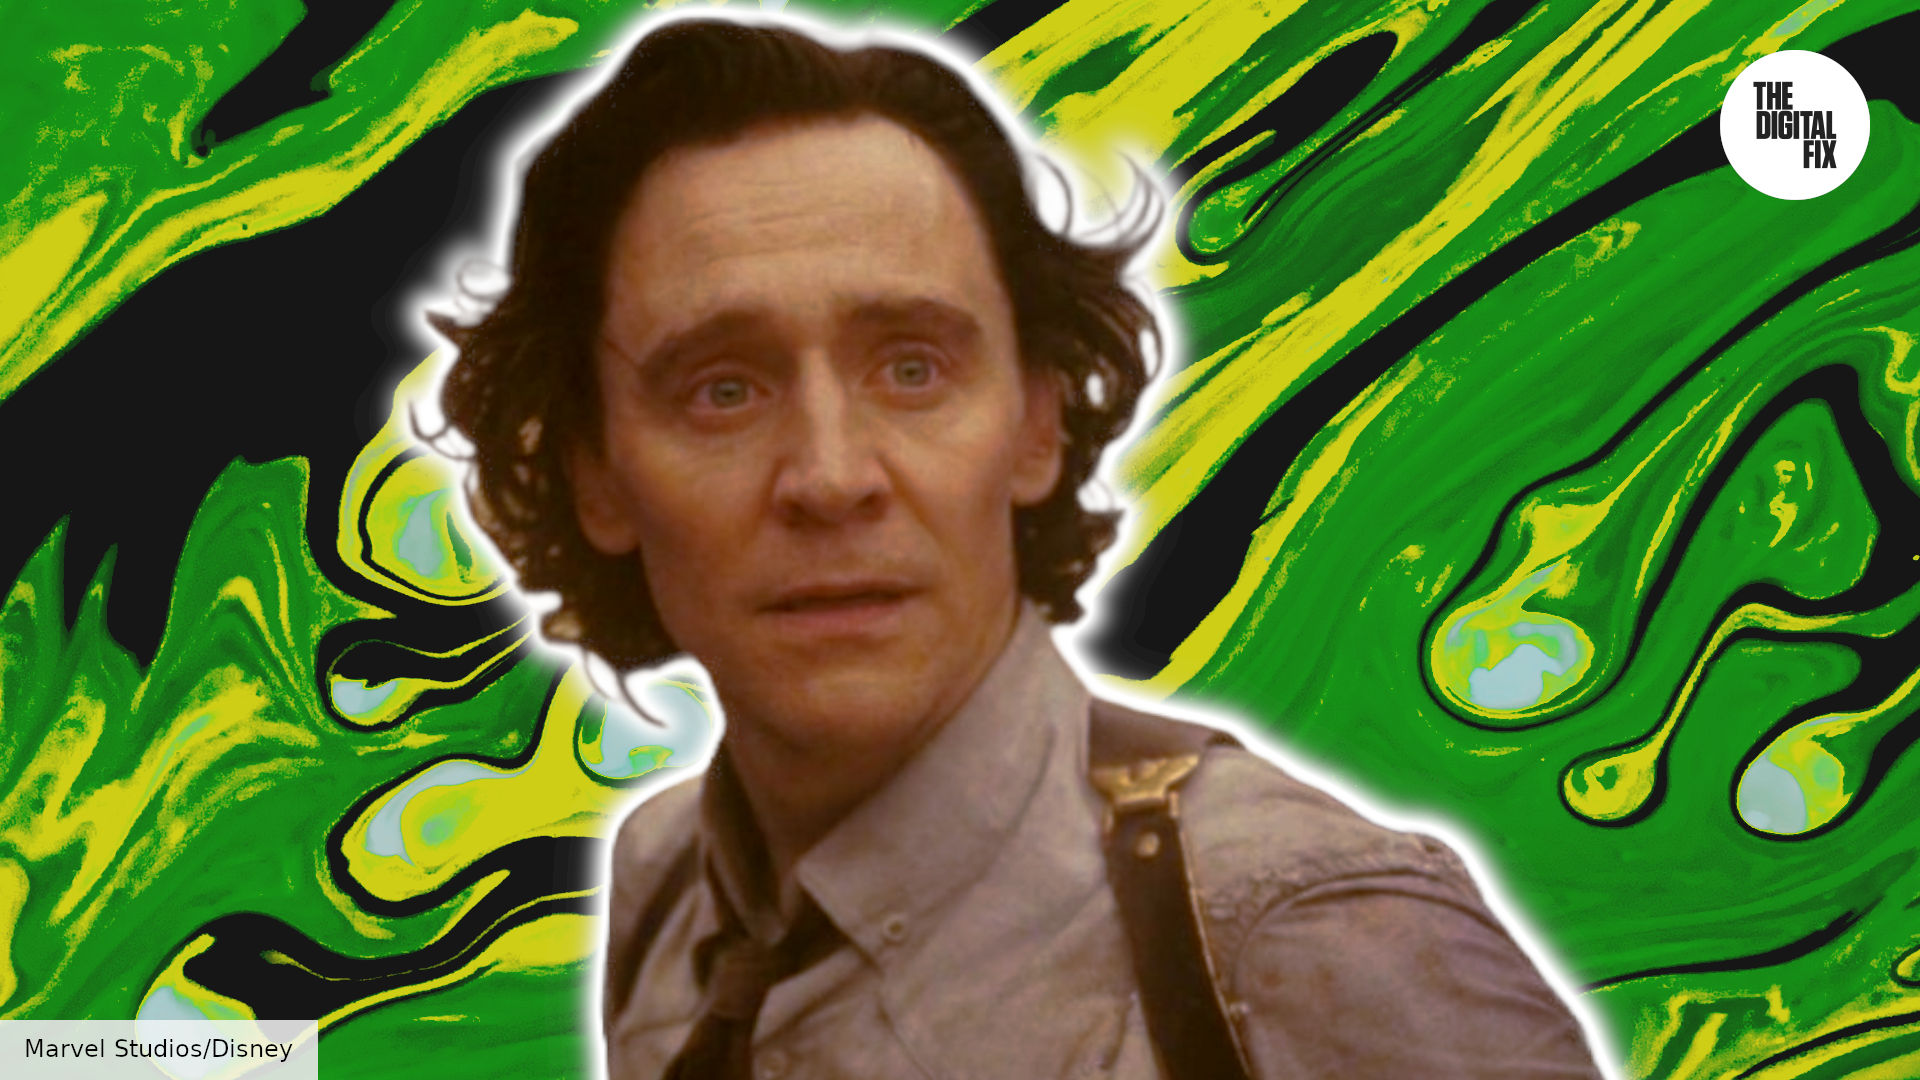 Marvel Fans Lose Their Absolute Minds Over The Cliffhanger Ending Of Loki  Season 2 Episode 4